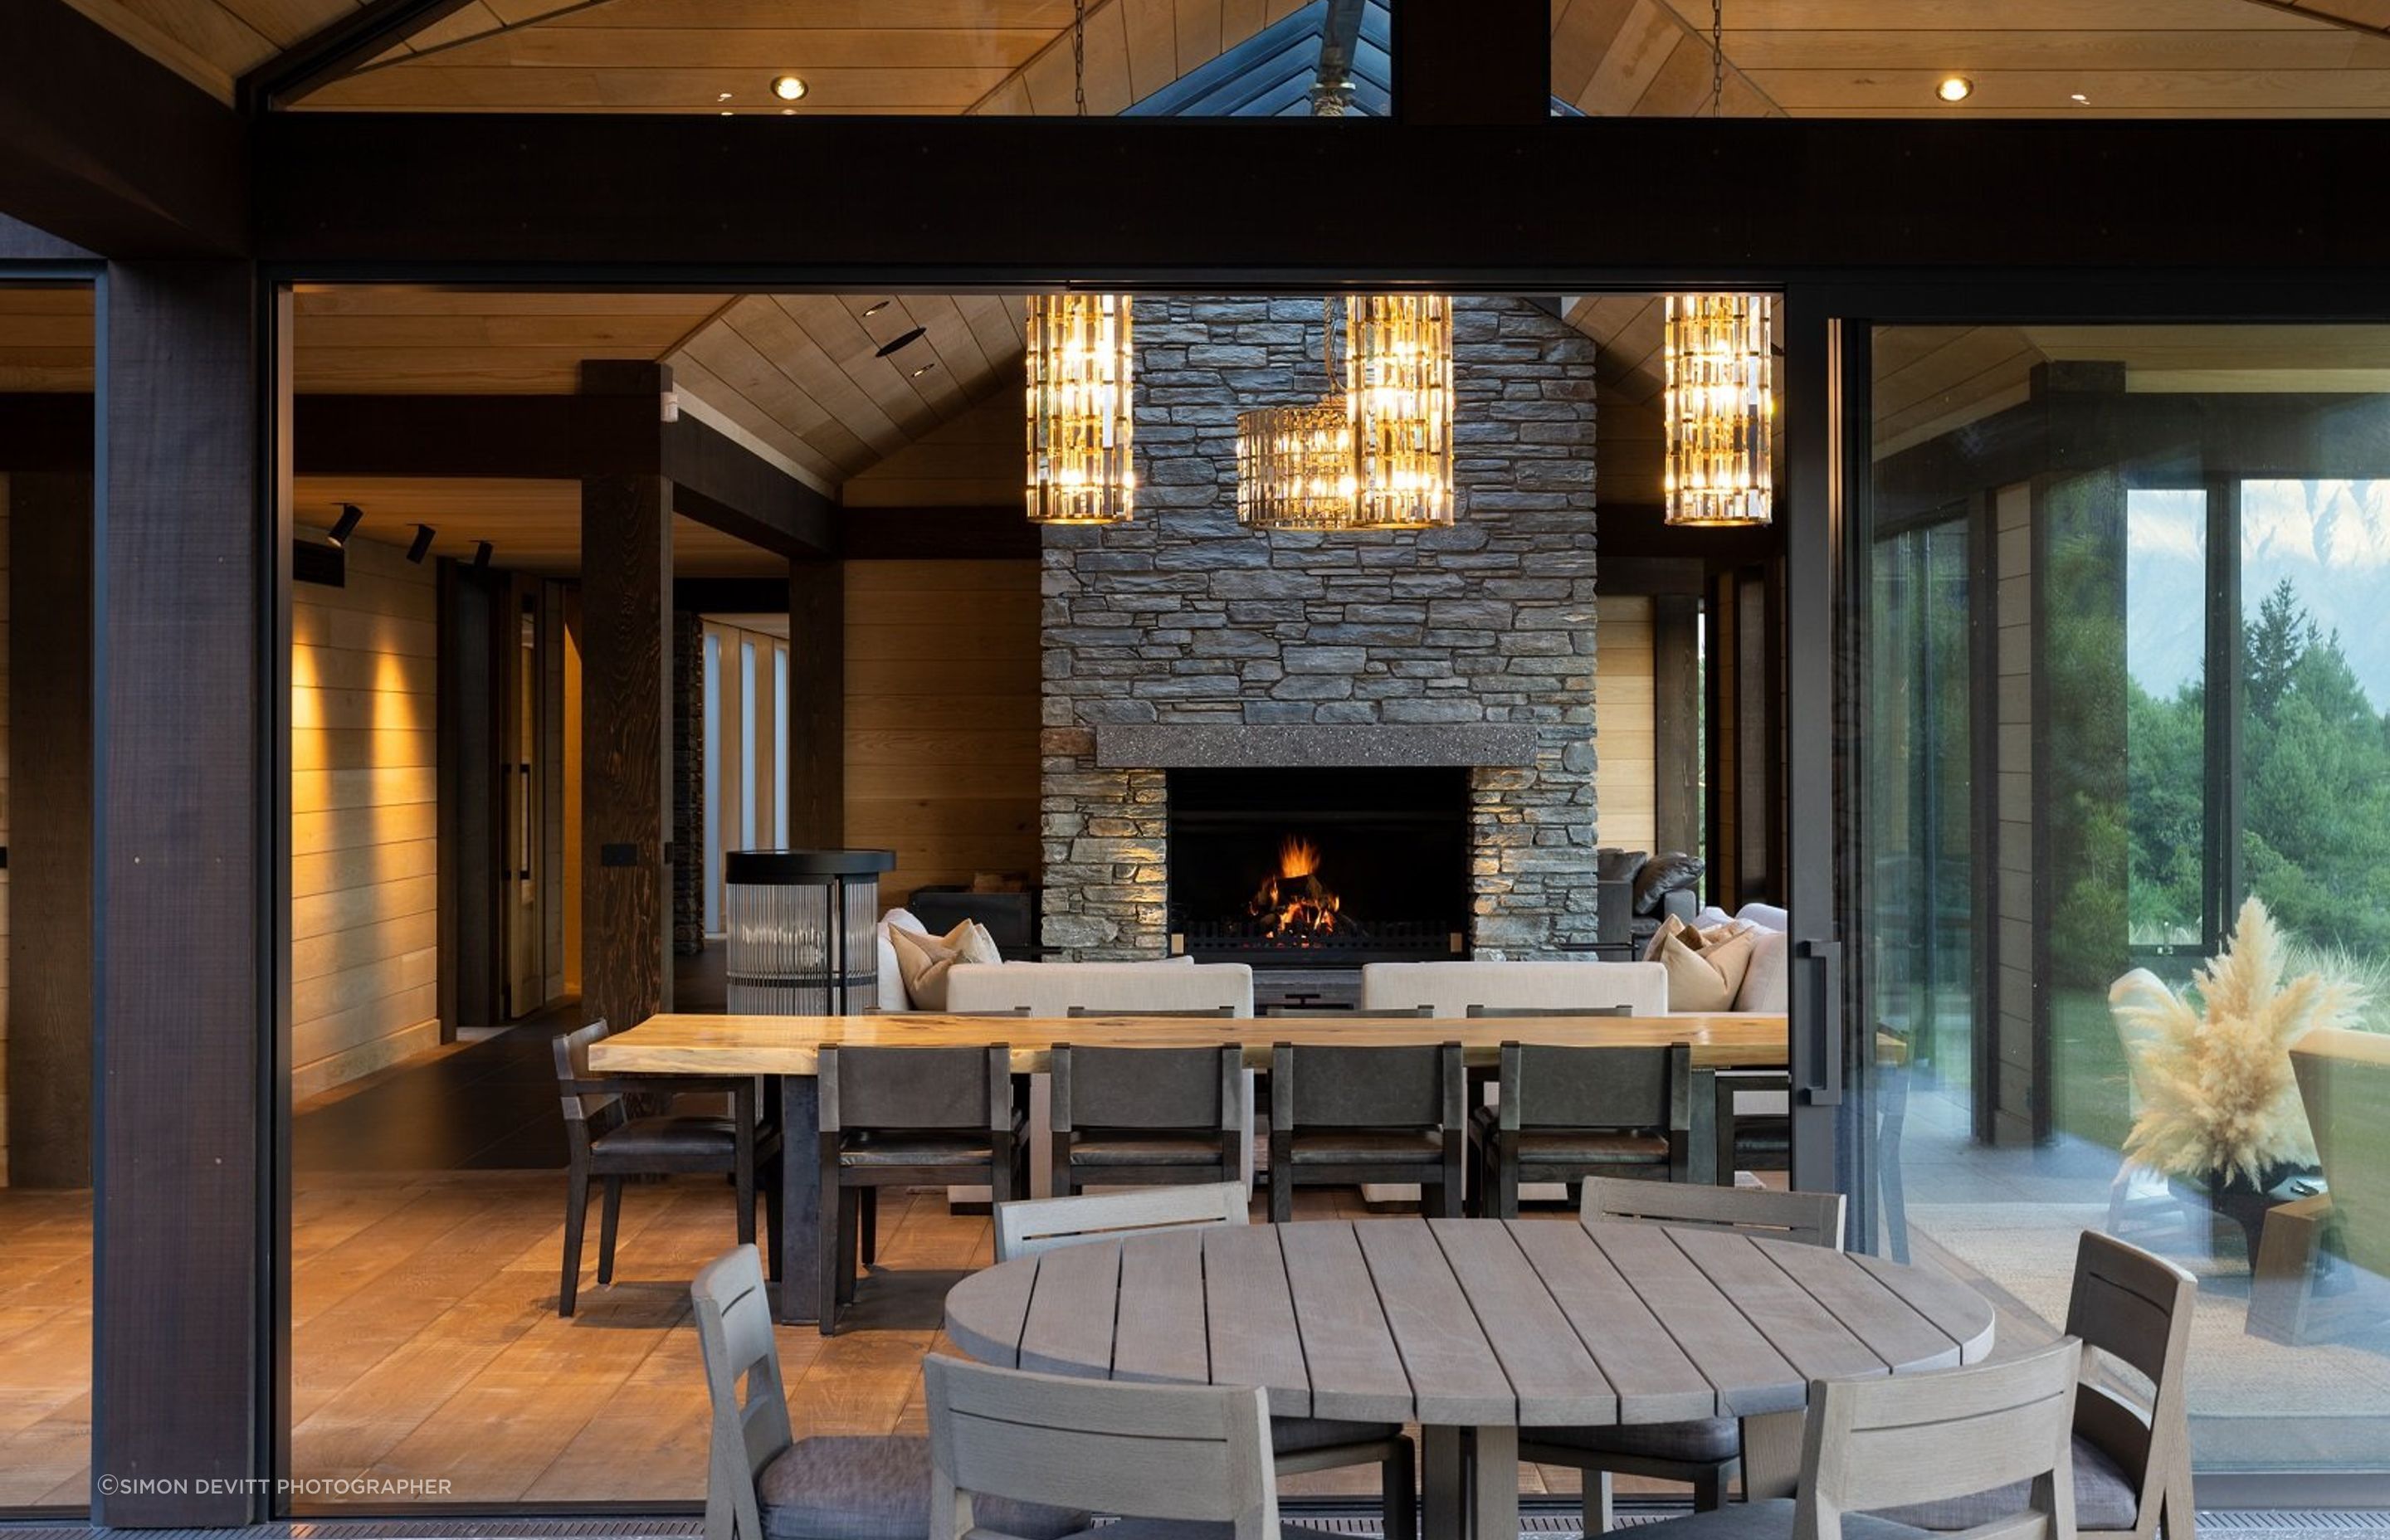 The refined use of stone, timber and glass captures the quintessential Queenstown look. | Photography: Simon Devitt